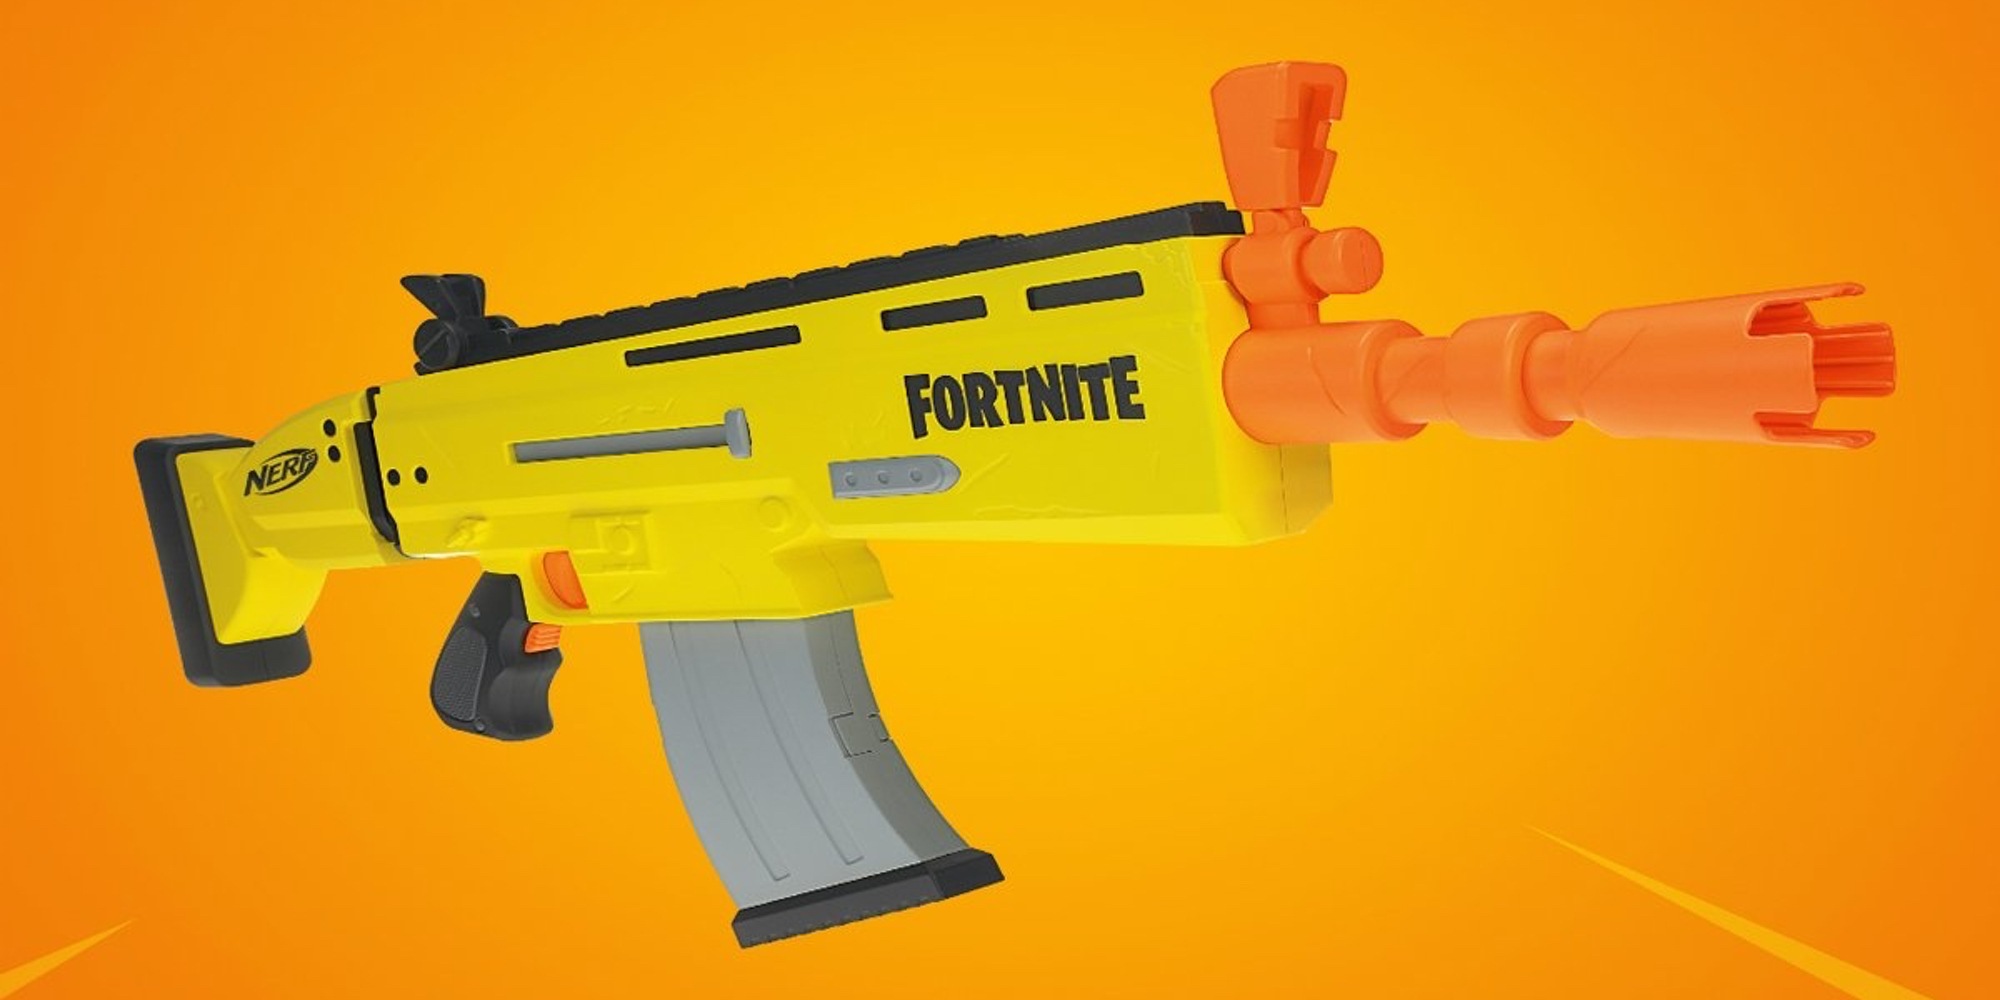 Fortnite Blaster unveiled before official launch next year